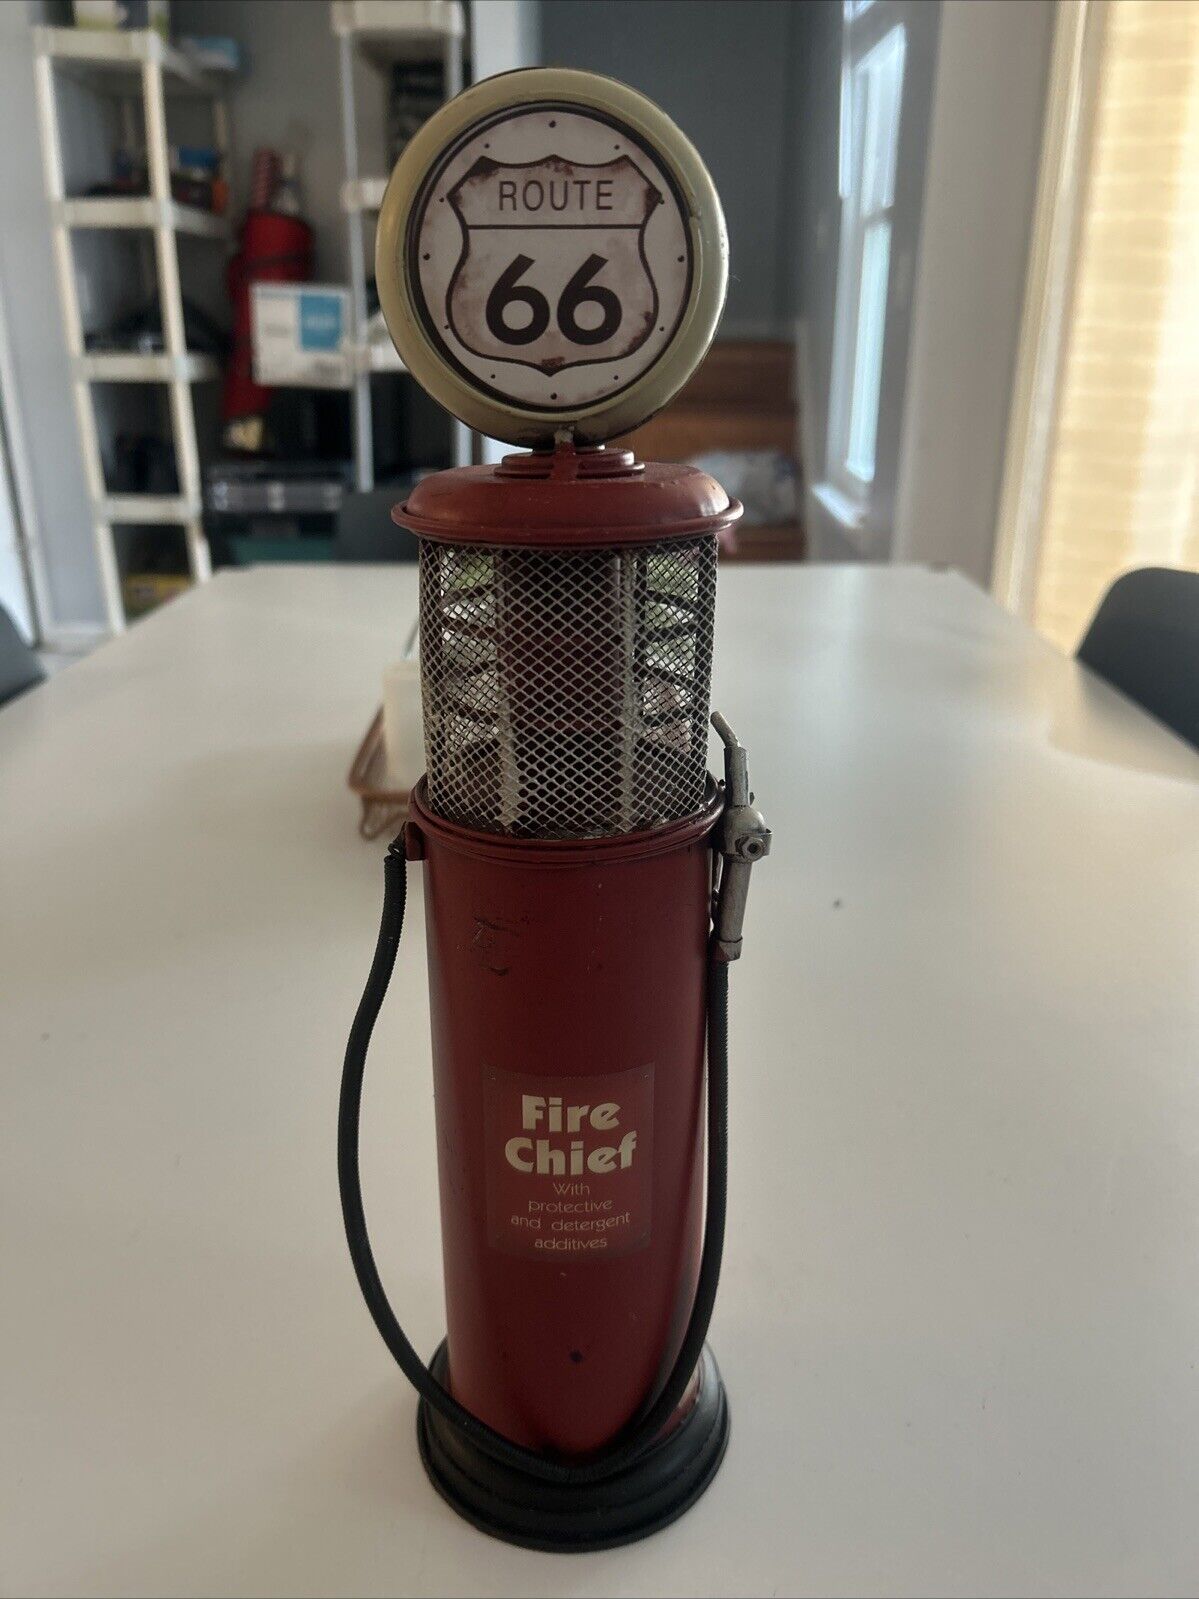 Red Fire Chief Gasoline Petrol Gas Fuel Pump Route 66